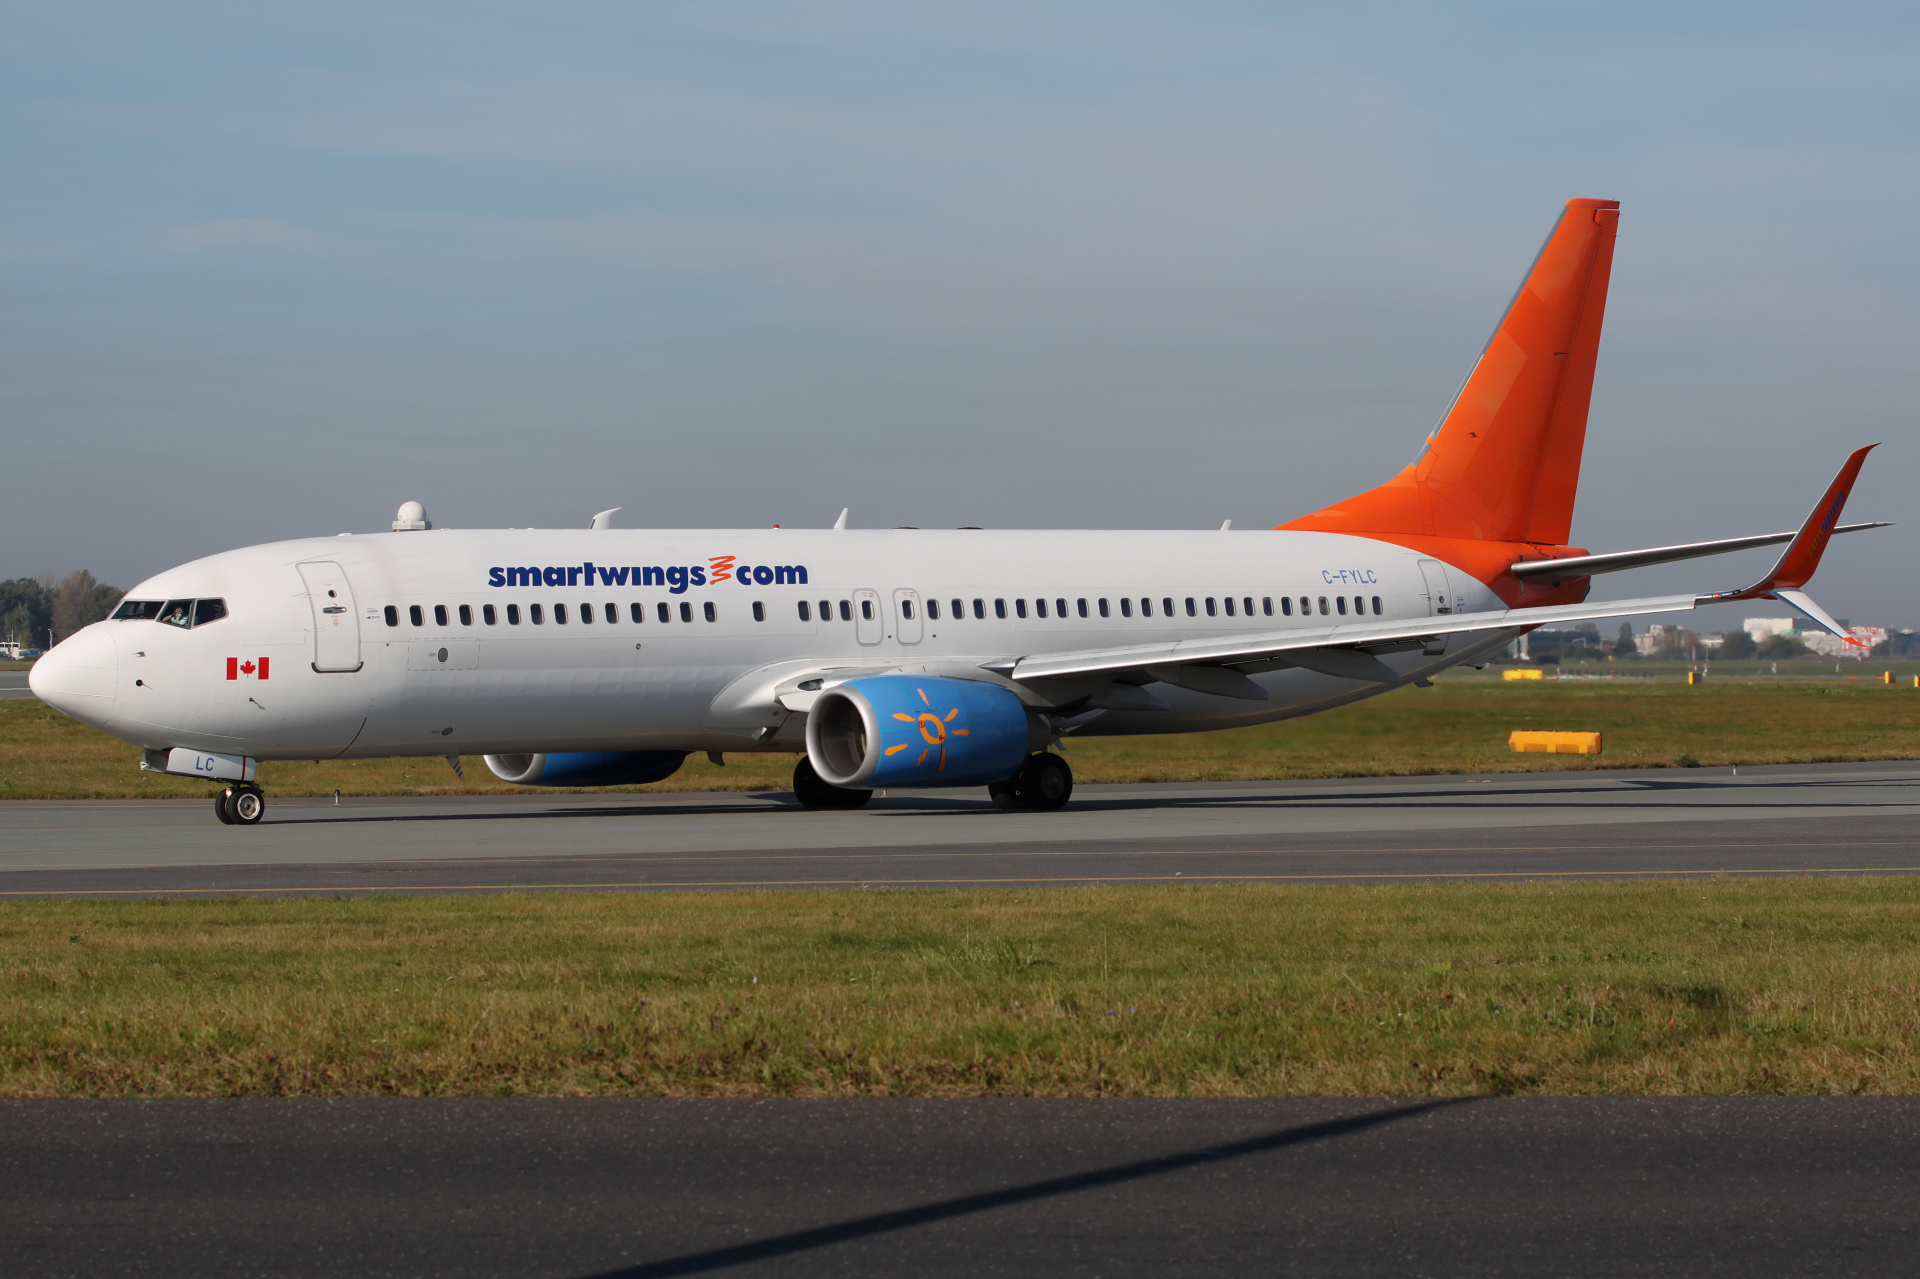 C-FYLC (partial livery, Sunwing) (Aircraft » EPWA Spotting » Boeing 737-800 » SmartWings)